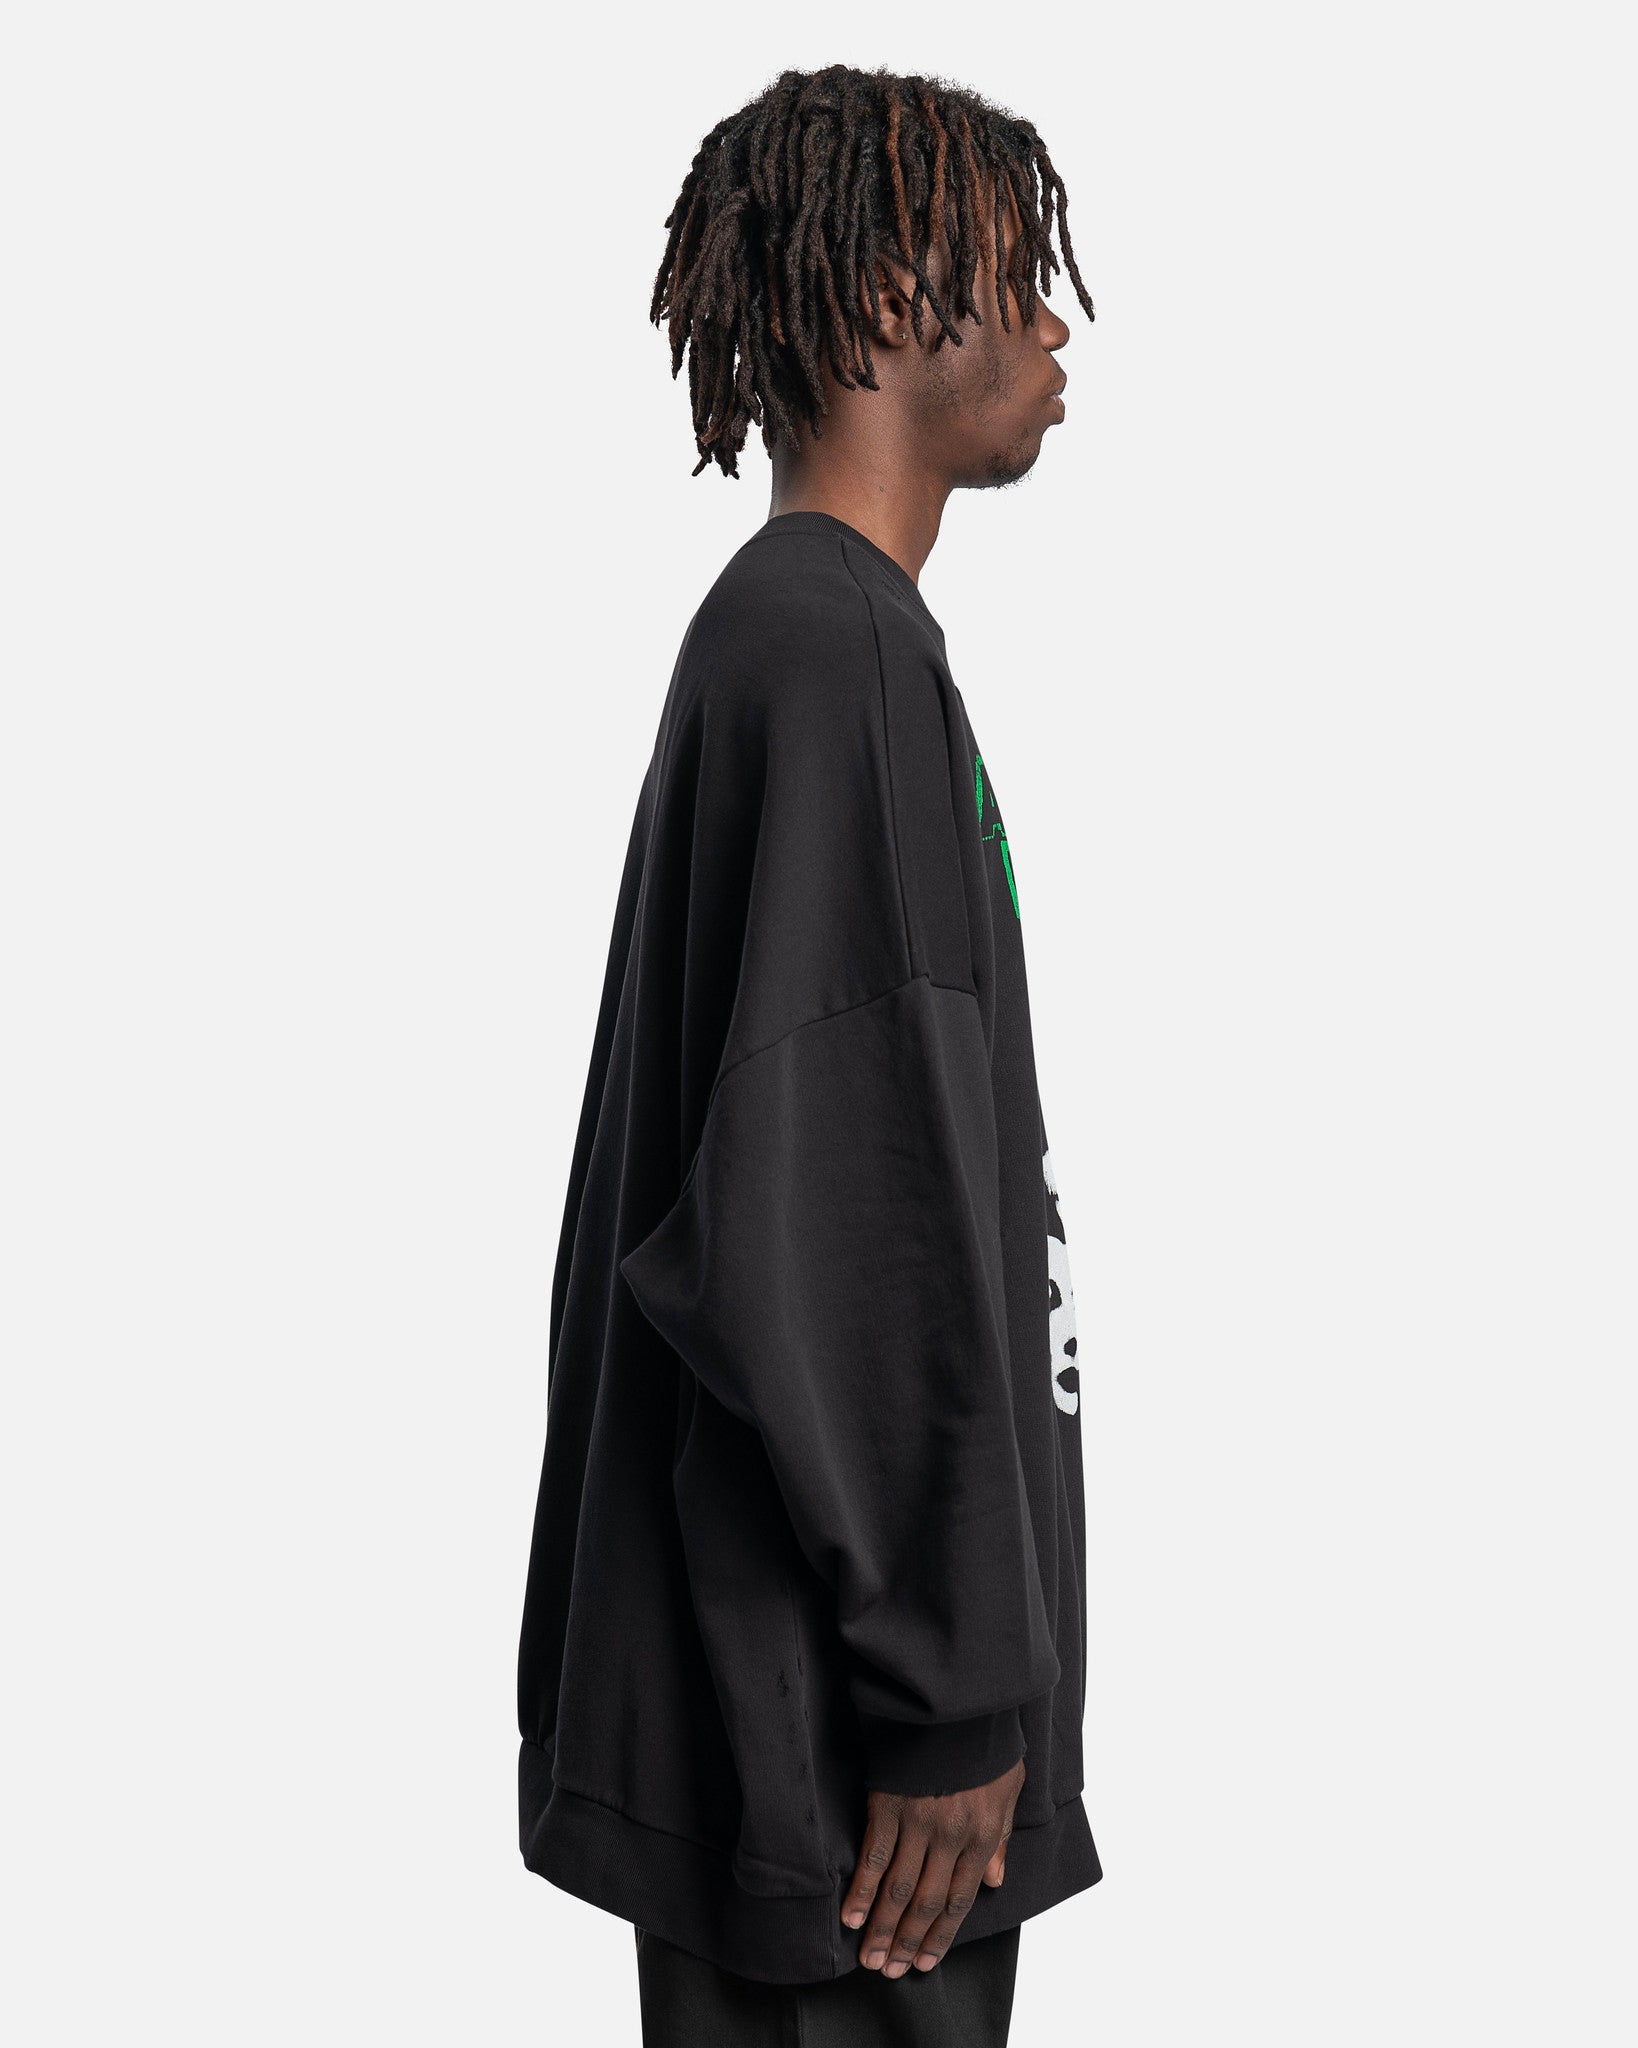 Raf Simons Mens Sweater Altered Reality Destroyed Crewnek Sweater in Black